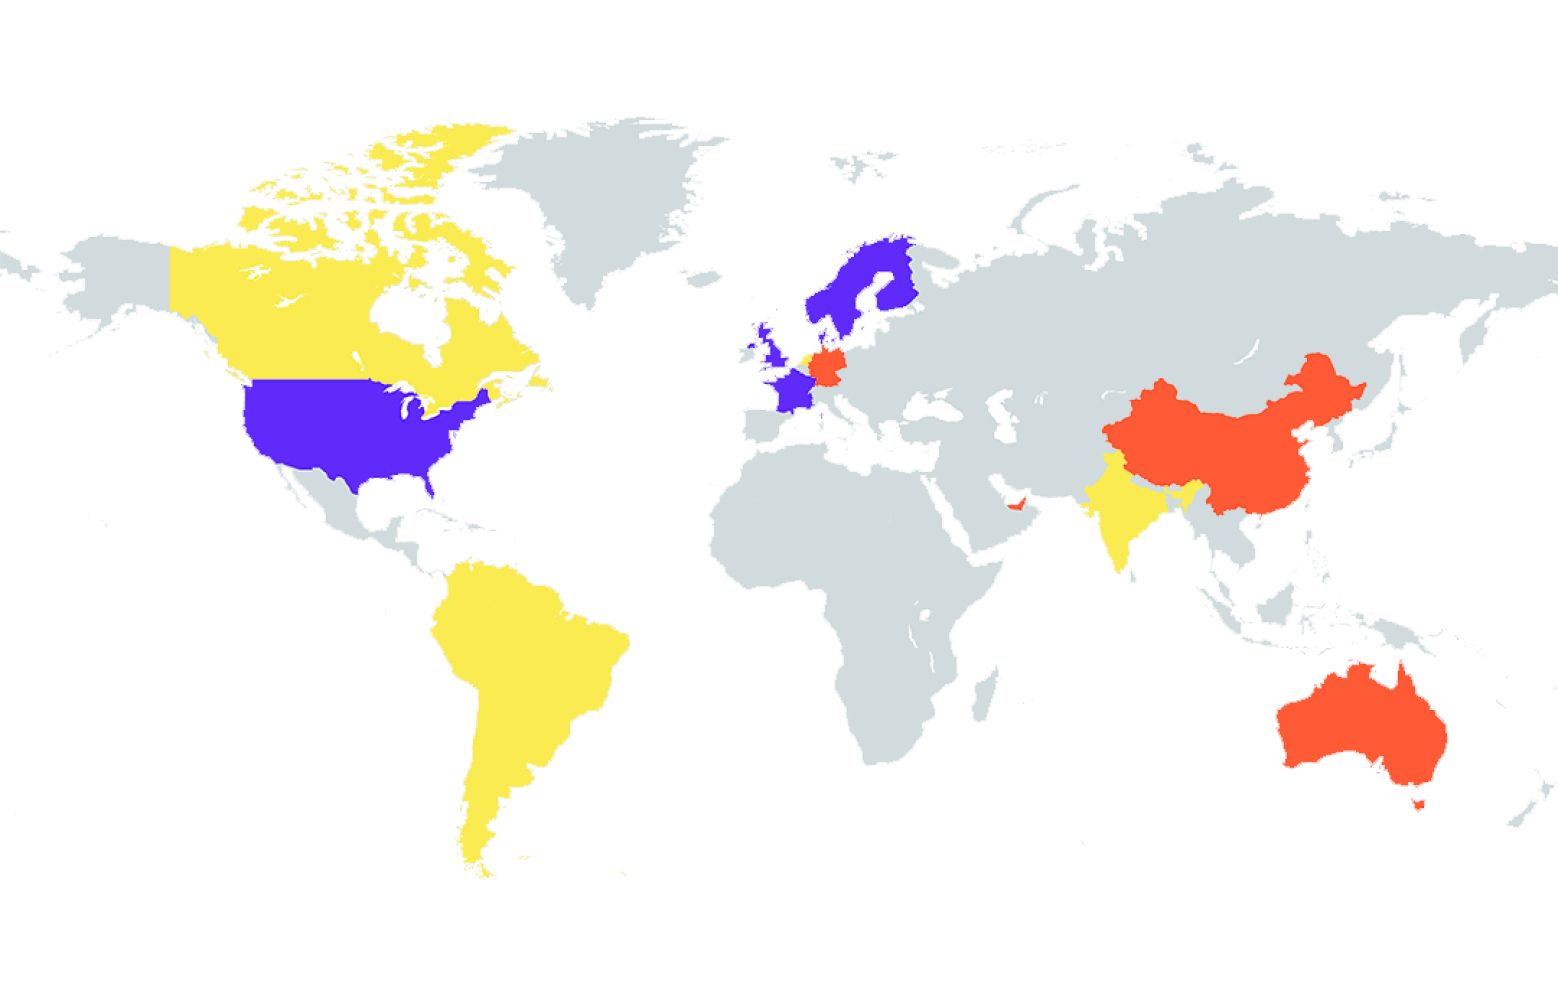 Countries the world over at different stages of BIM adoption